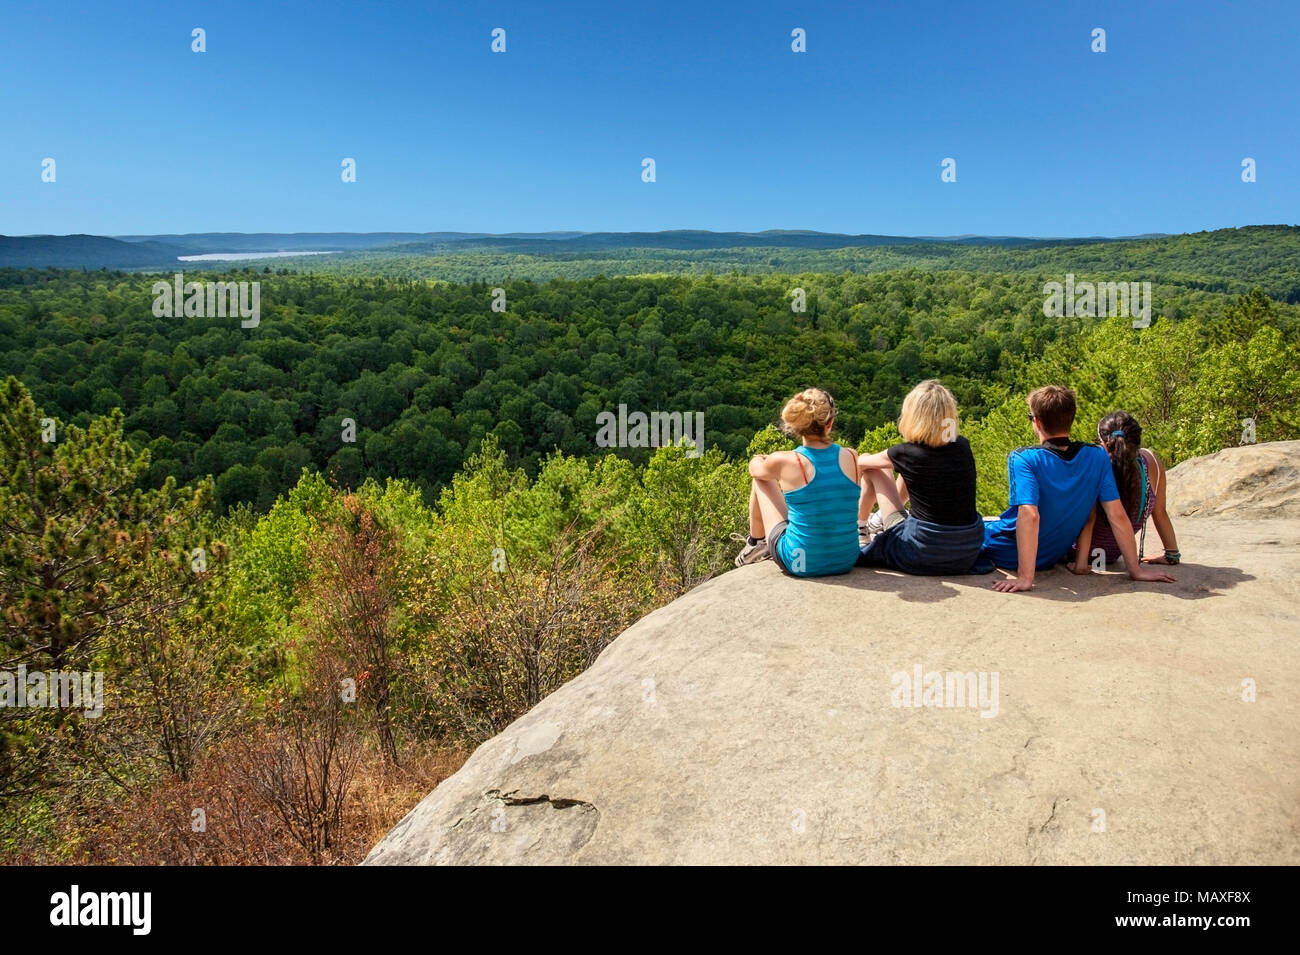 hikers sitting enjoying the view, Algonquin Provincial Park, Ontario, Canada The lookout area is a ledge of rock, 300-400 feet long, polished smooth b Stock Photo